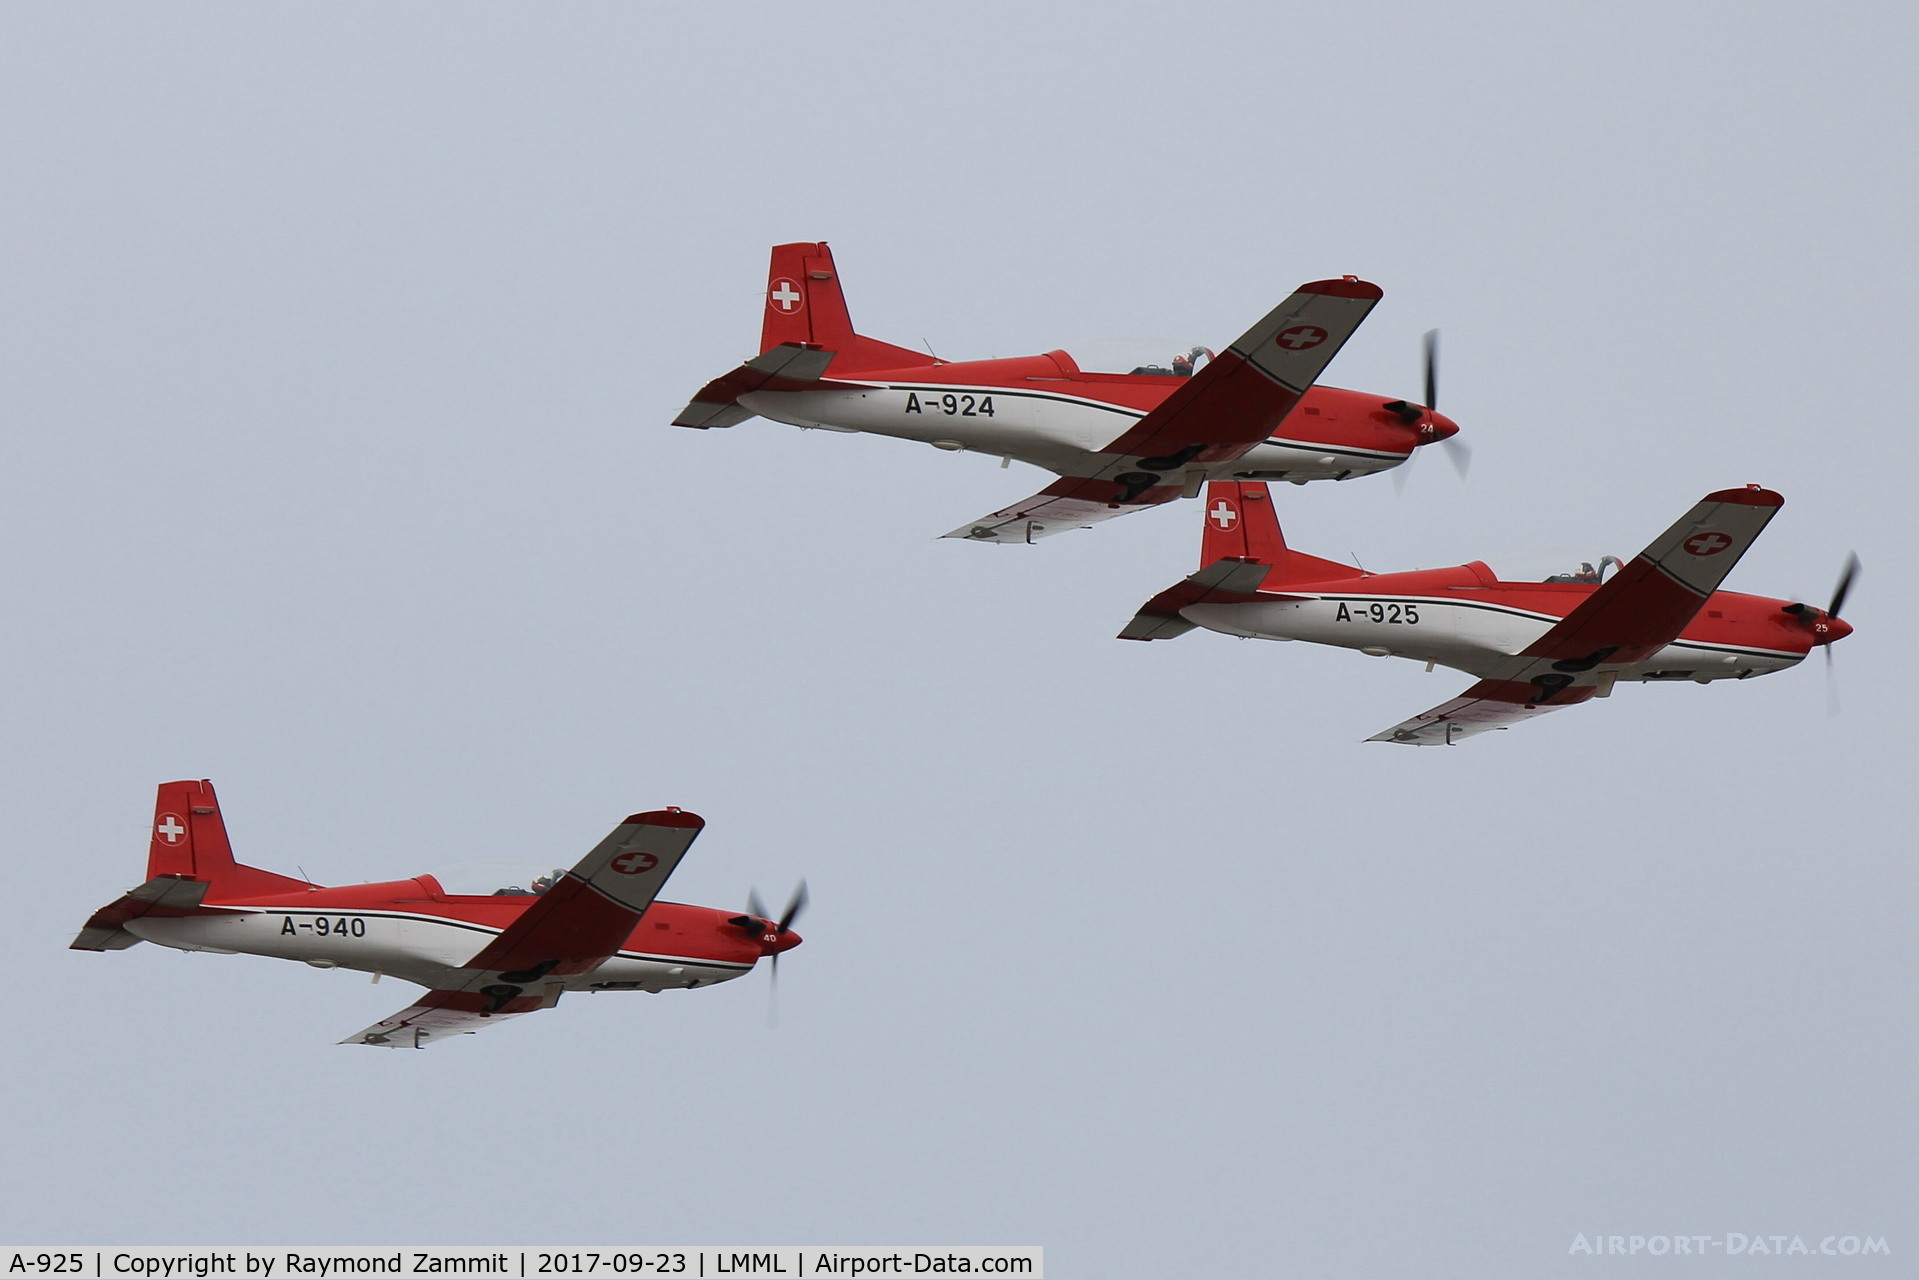 A-925, 1983 Pilatus PC-7 Turbo Trainer C/N 333, Pilatus PC-7 A-924,A-925 and A-940 of the Swiss Air Force